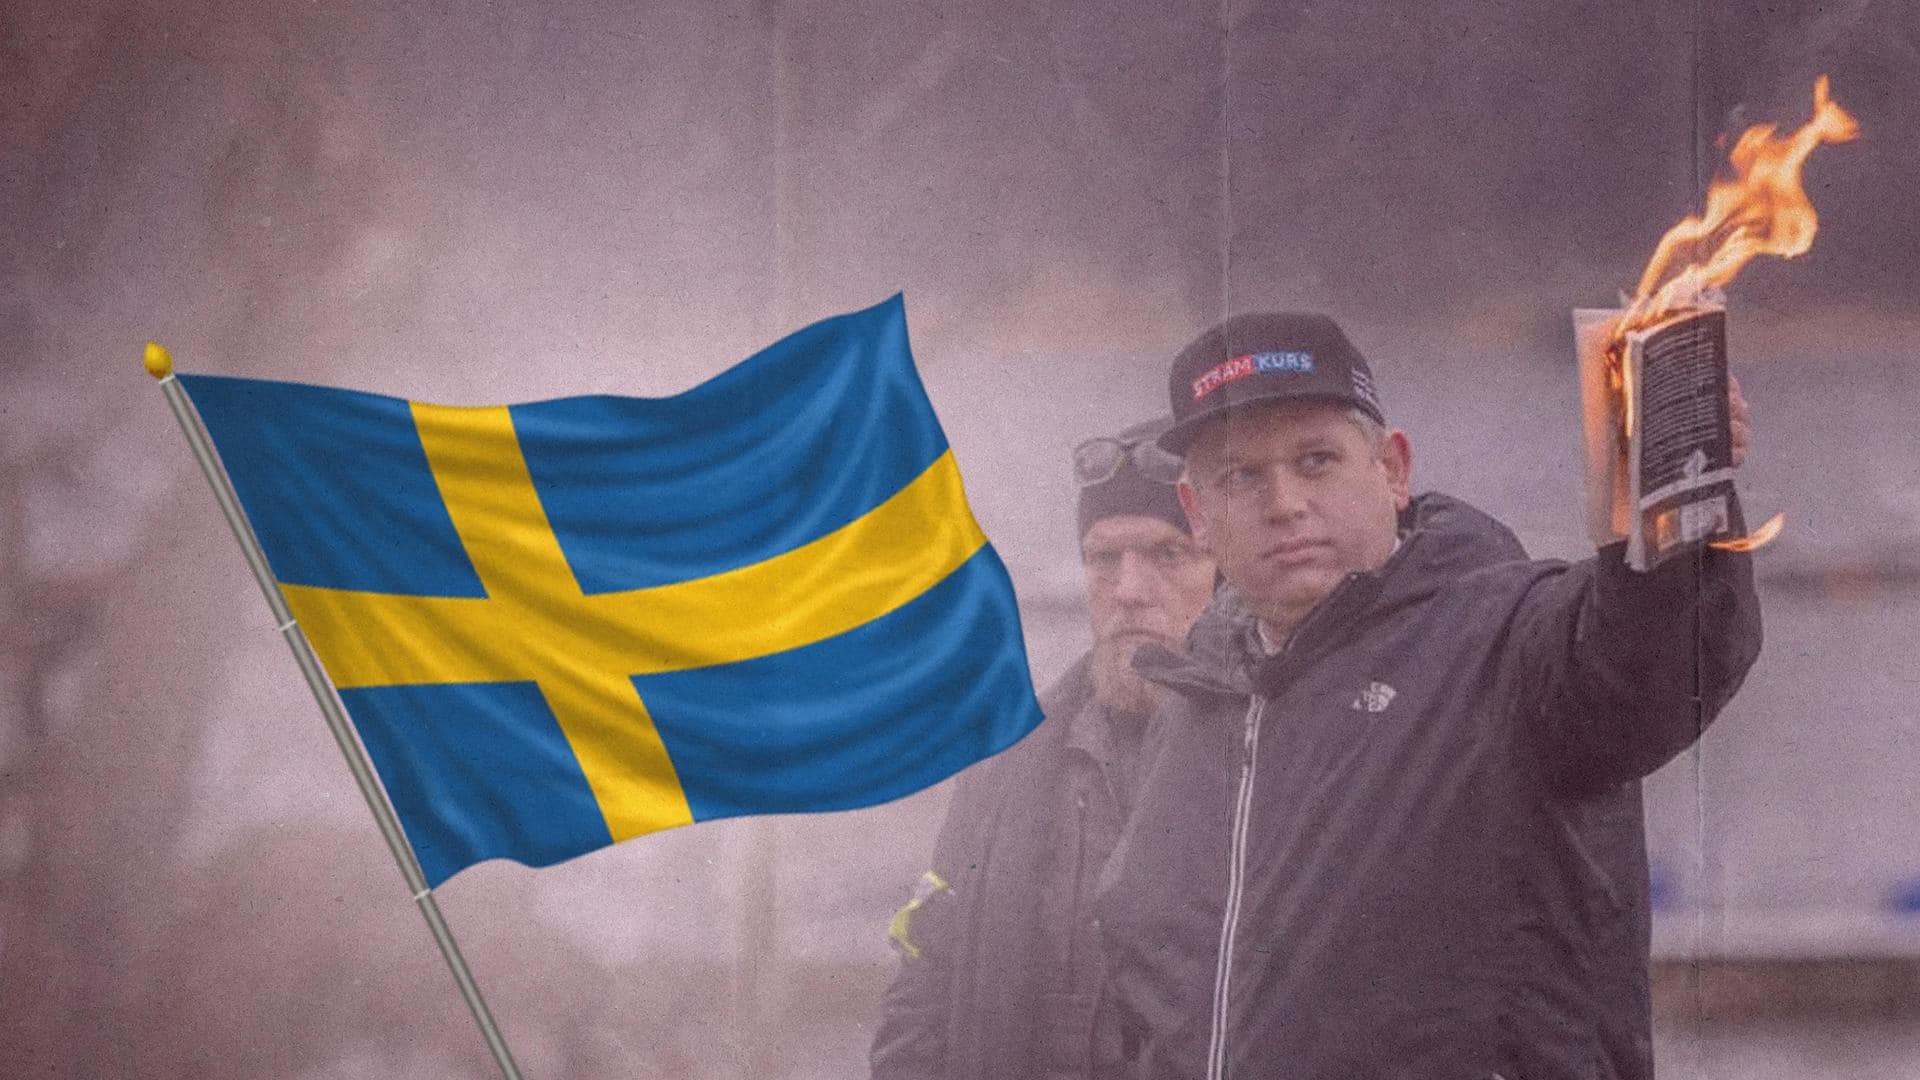 Sweden: Police approves Quran-burning protest outside mosque